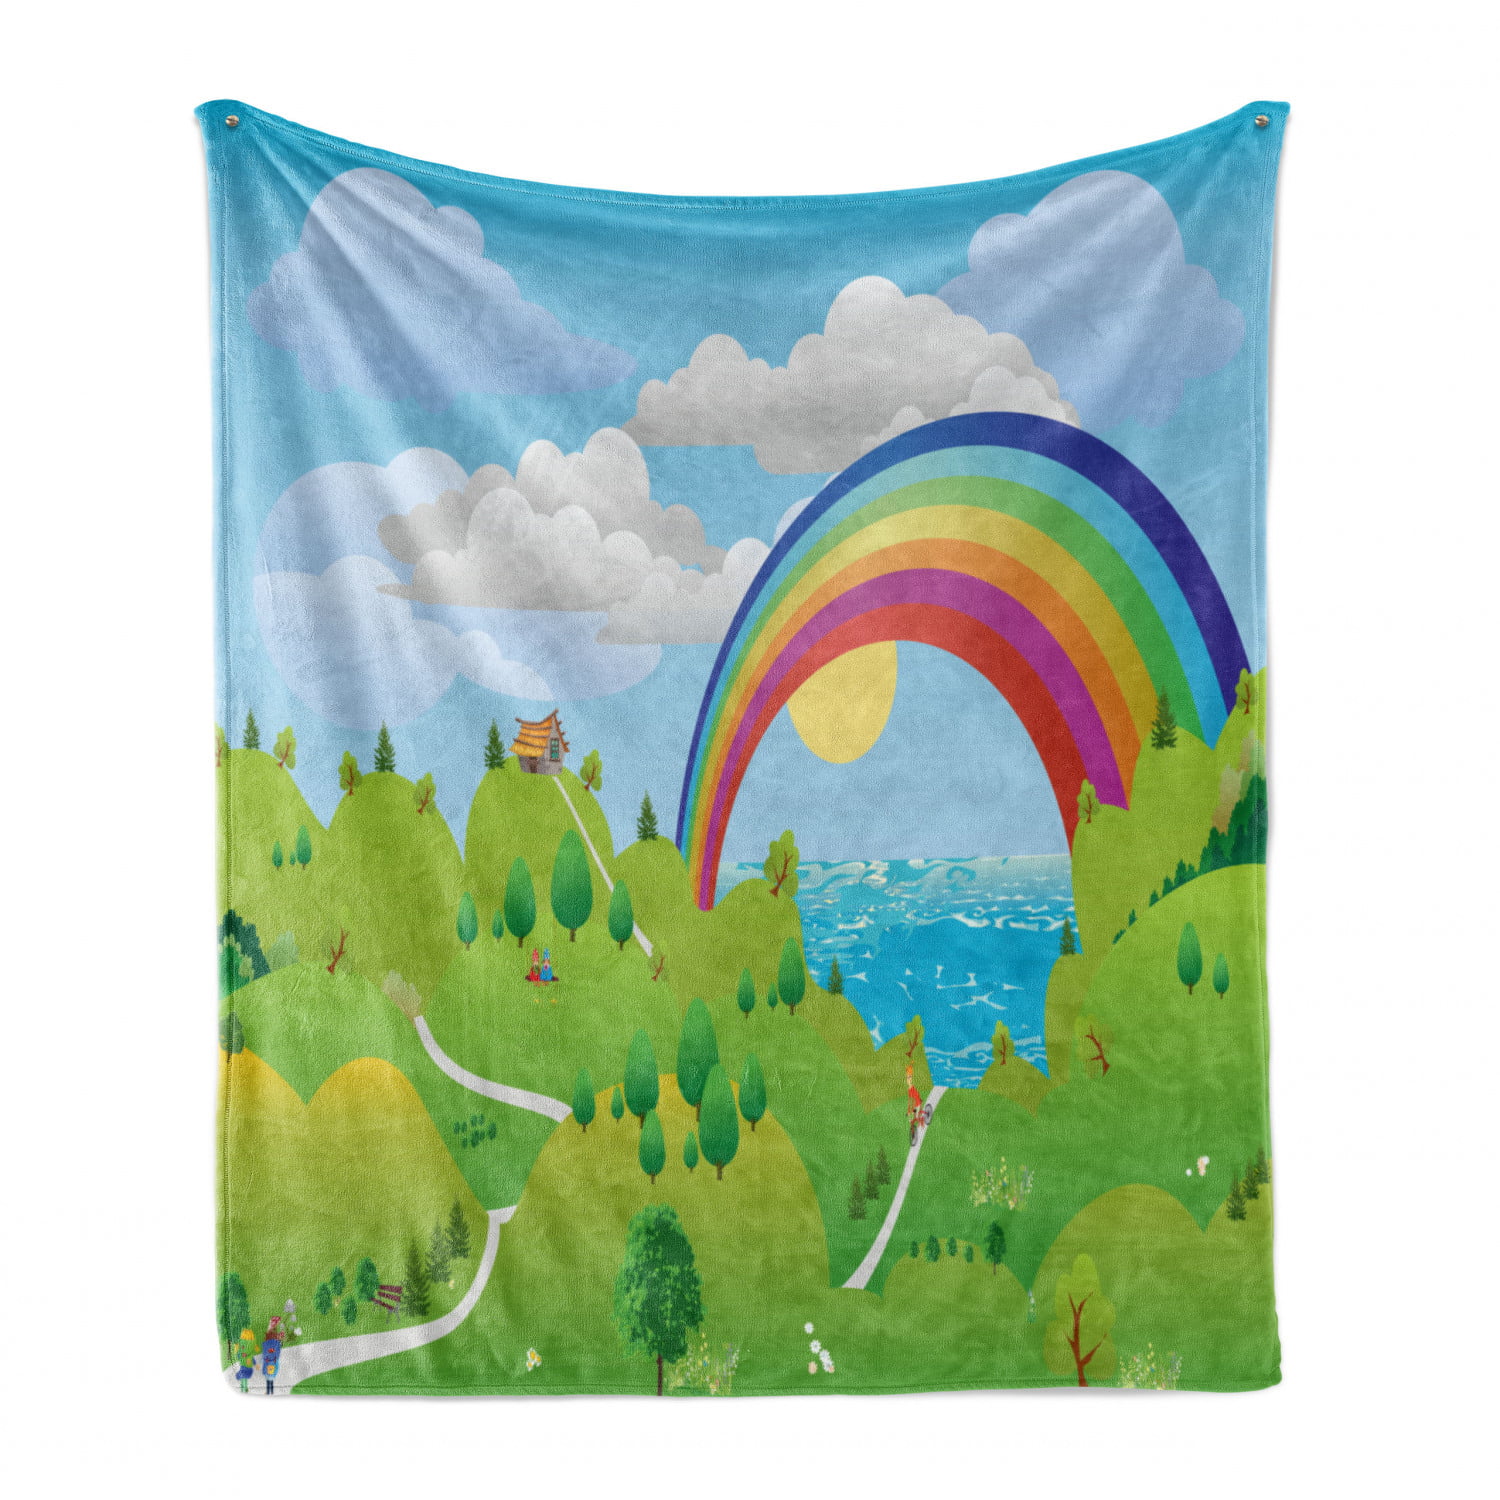 Demonstration of Land Elements Funny Unicorns and Rainbows Ambesonne Fantasy World Soft Flannel Fleece Throw Blanket White Multicolor 50 x 60 Cozy Plush for Indoor and Outdoor Use 